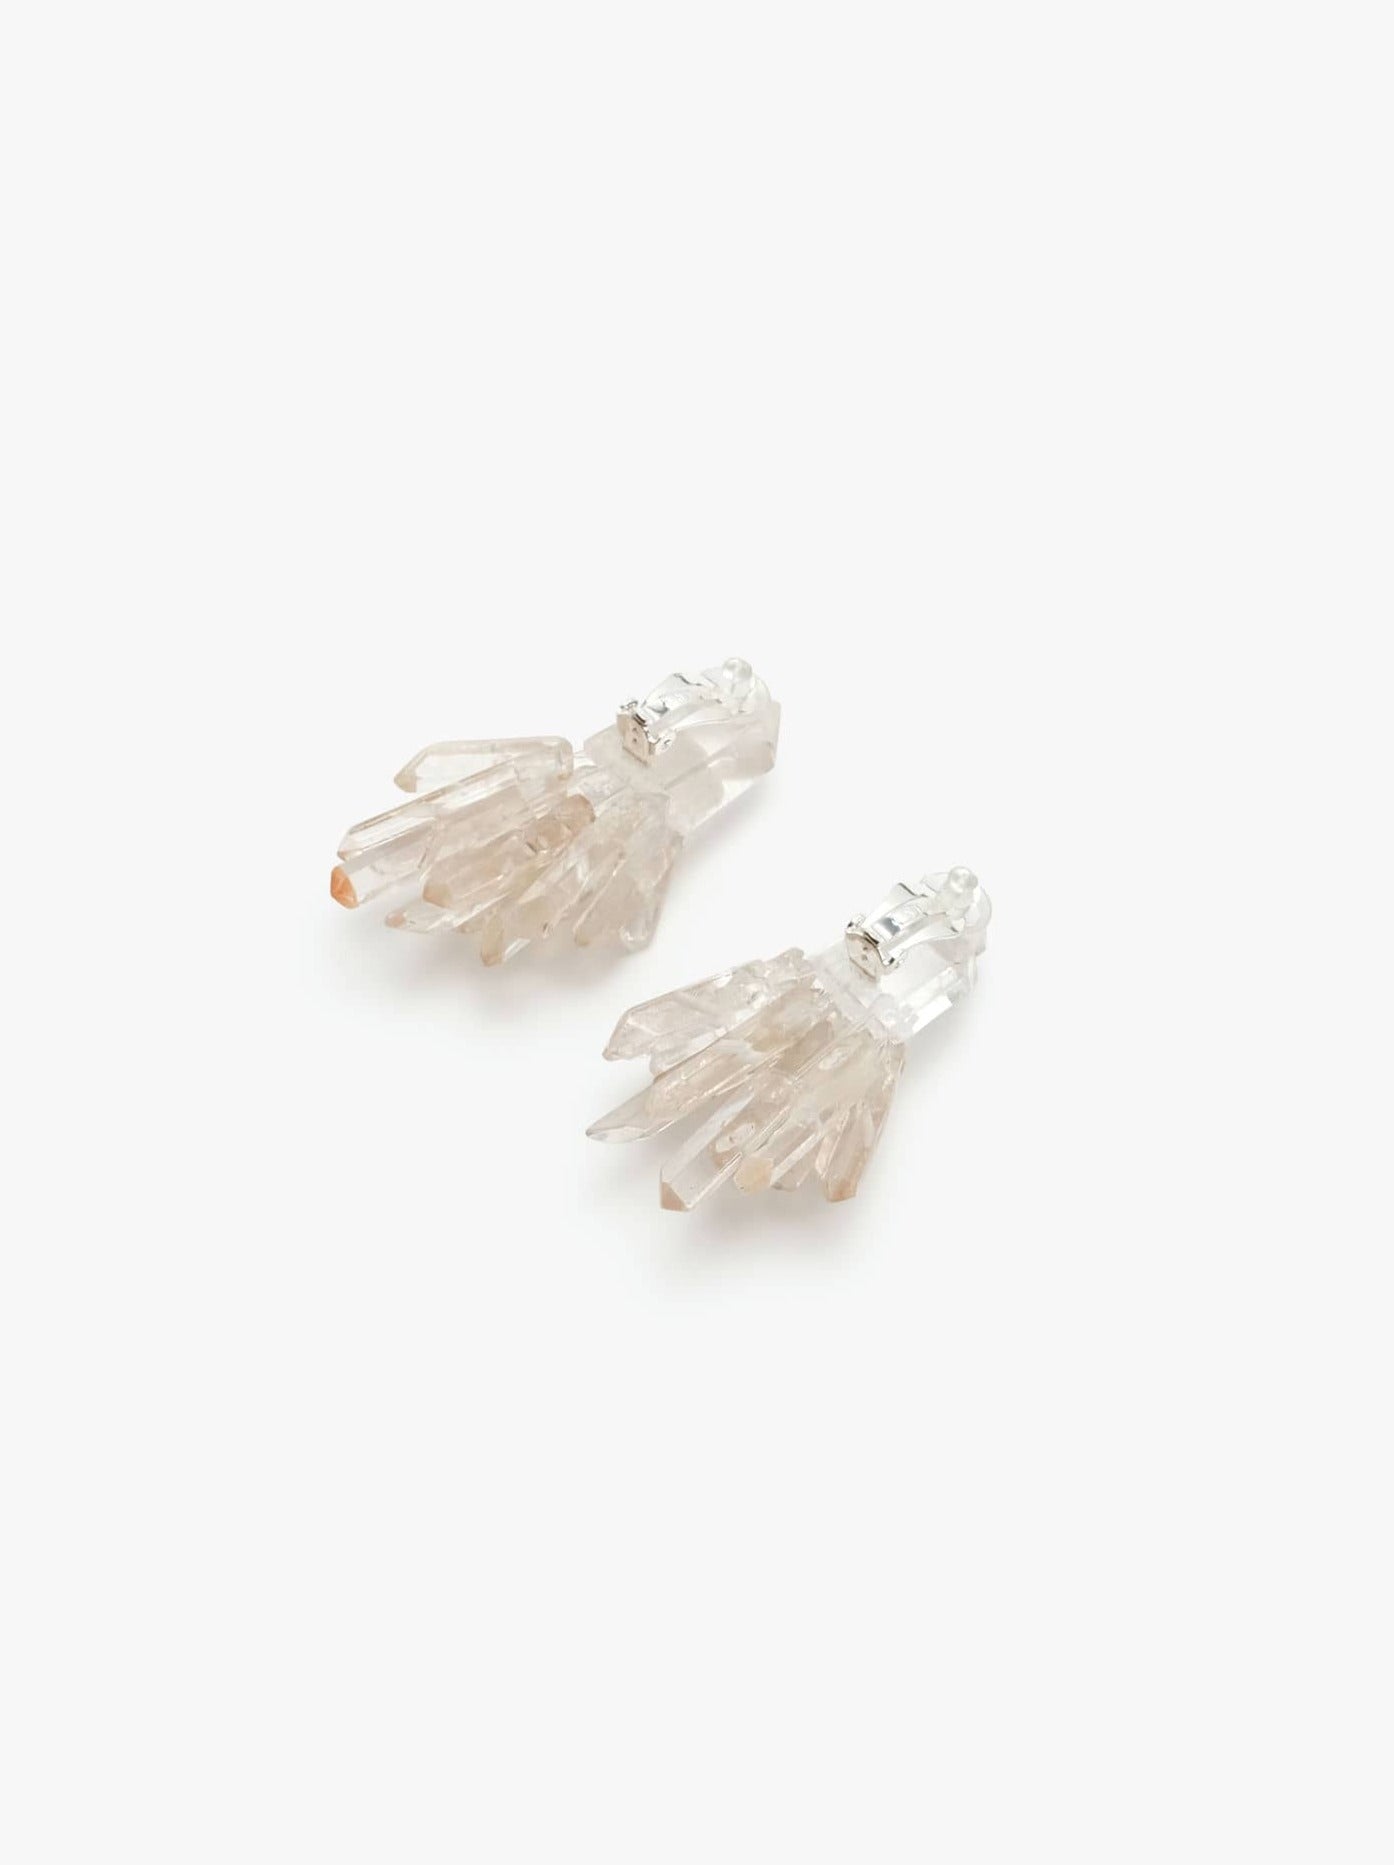 50th anniversary earclips: mountain crystal